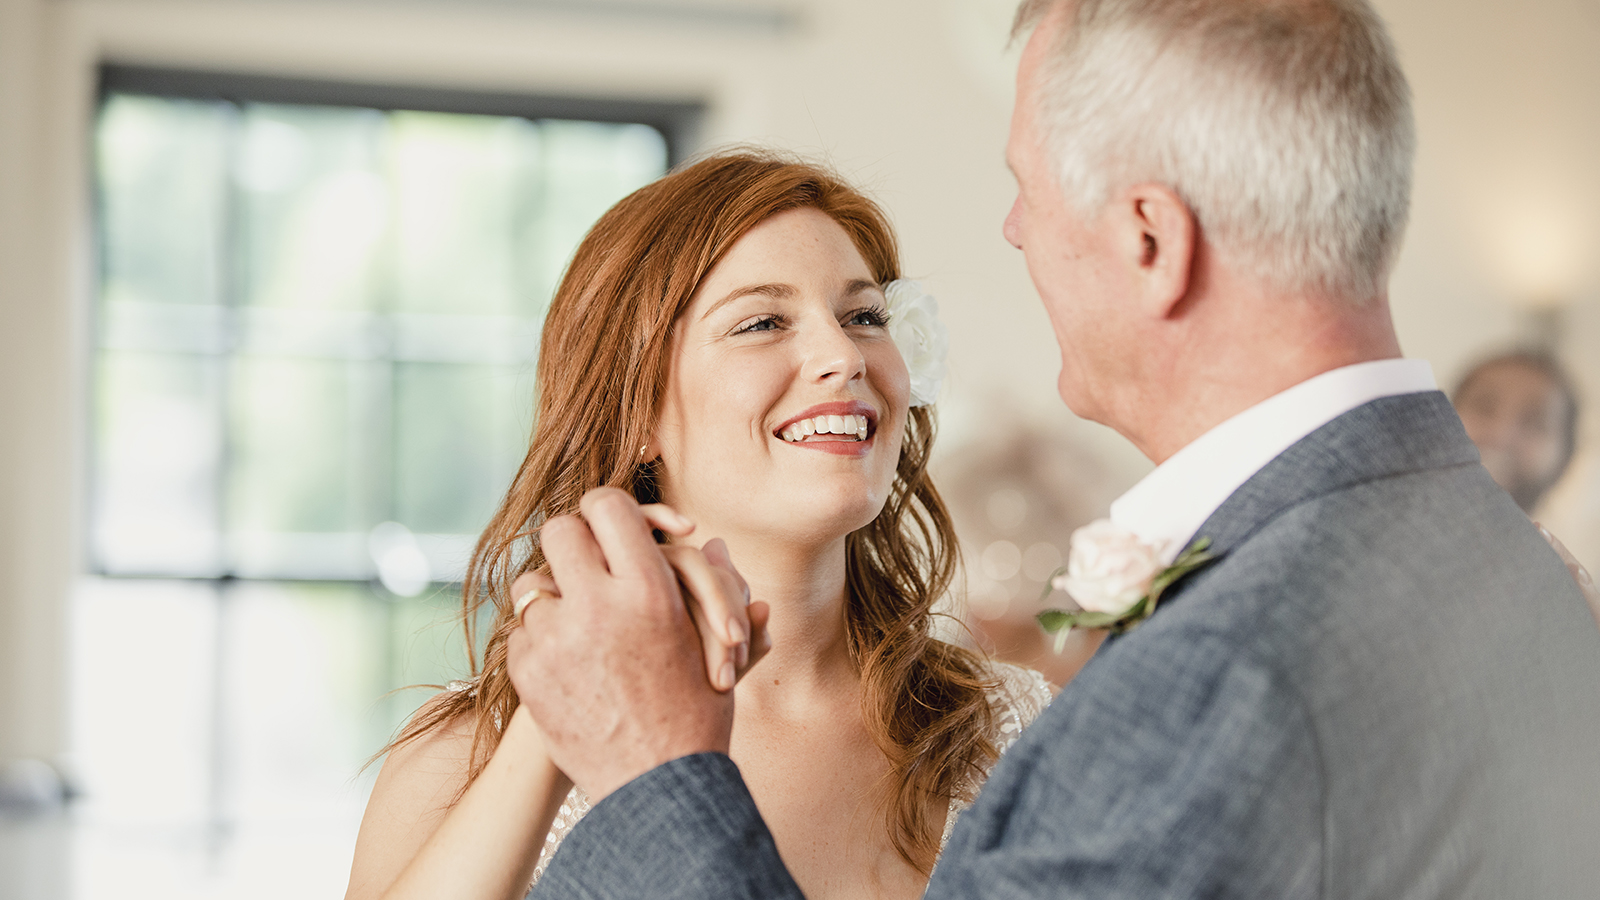 Beautiful bride is enjoying a dance with her father on her wedding day.